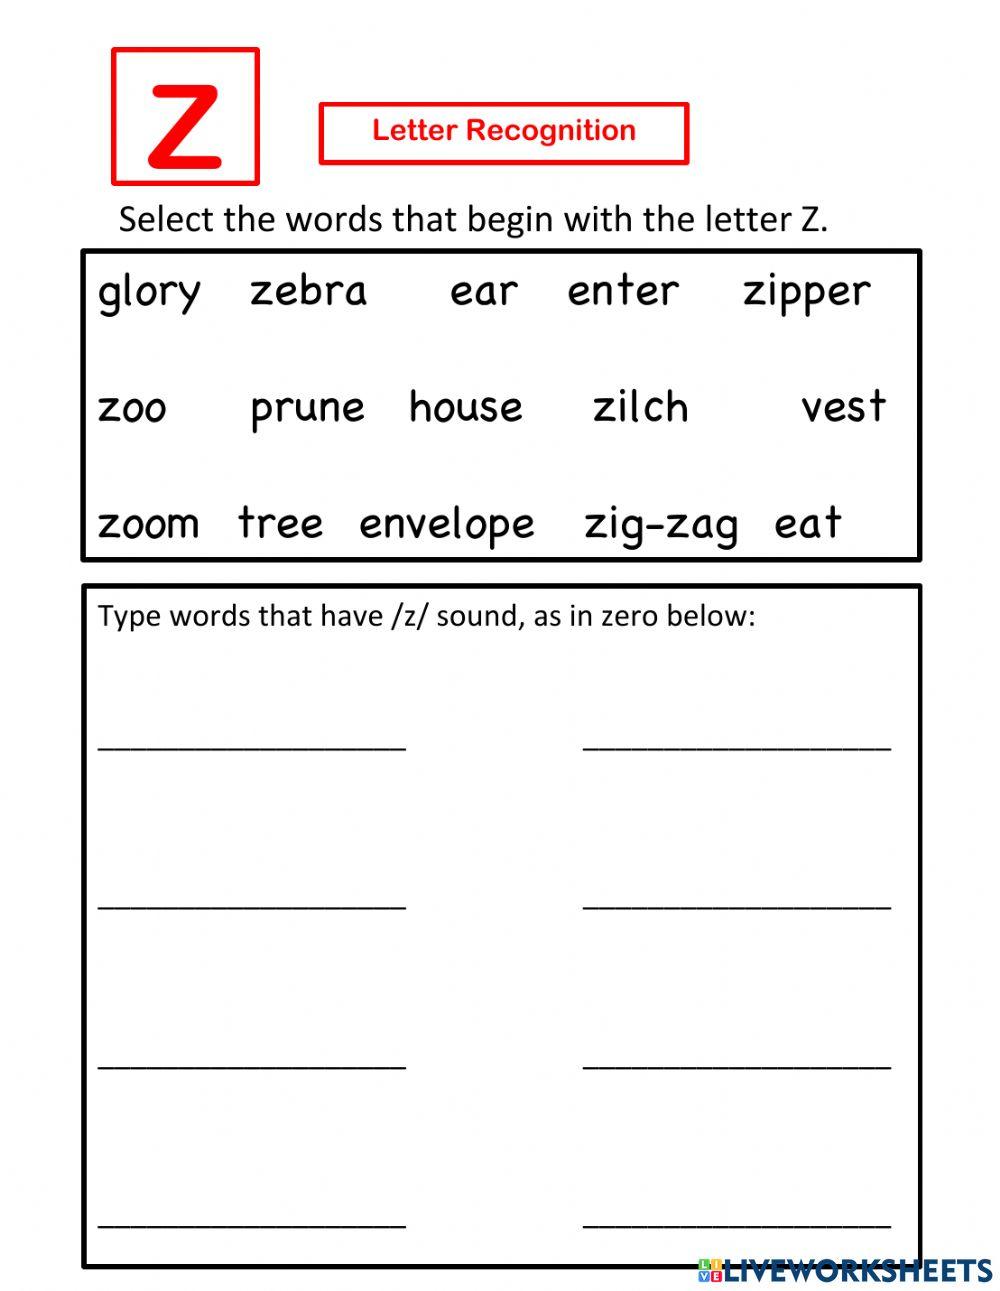 Letter Z recognition - Select and Write